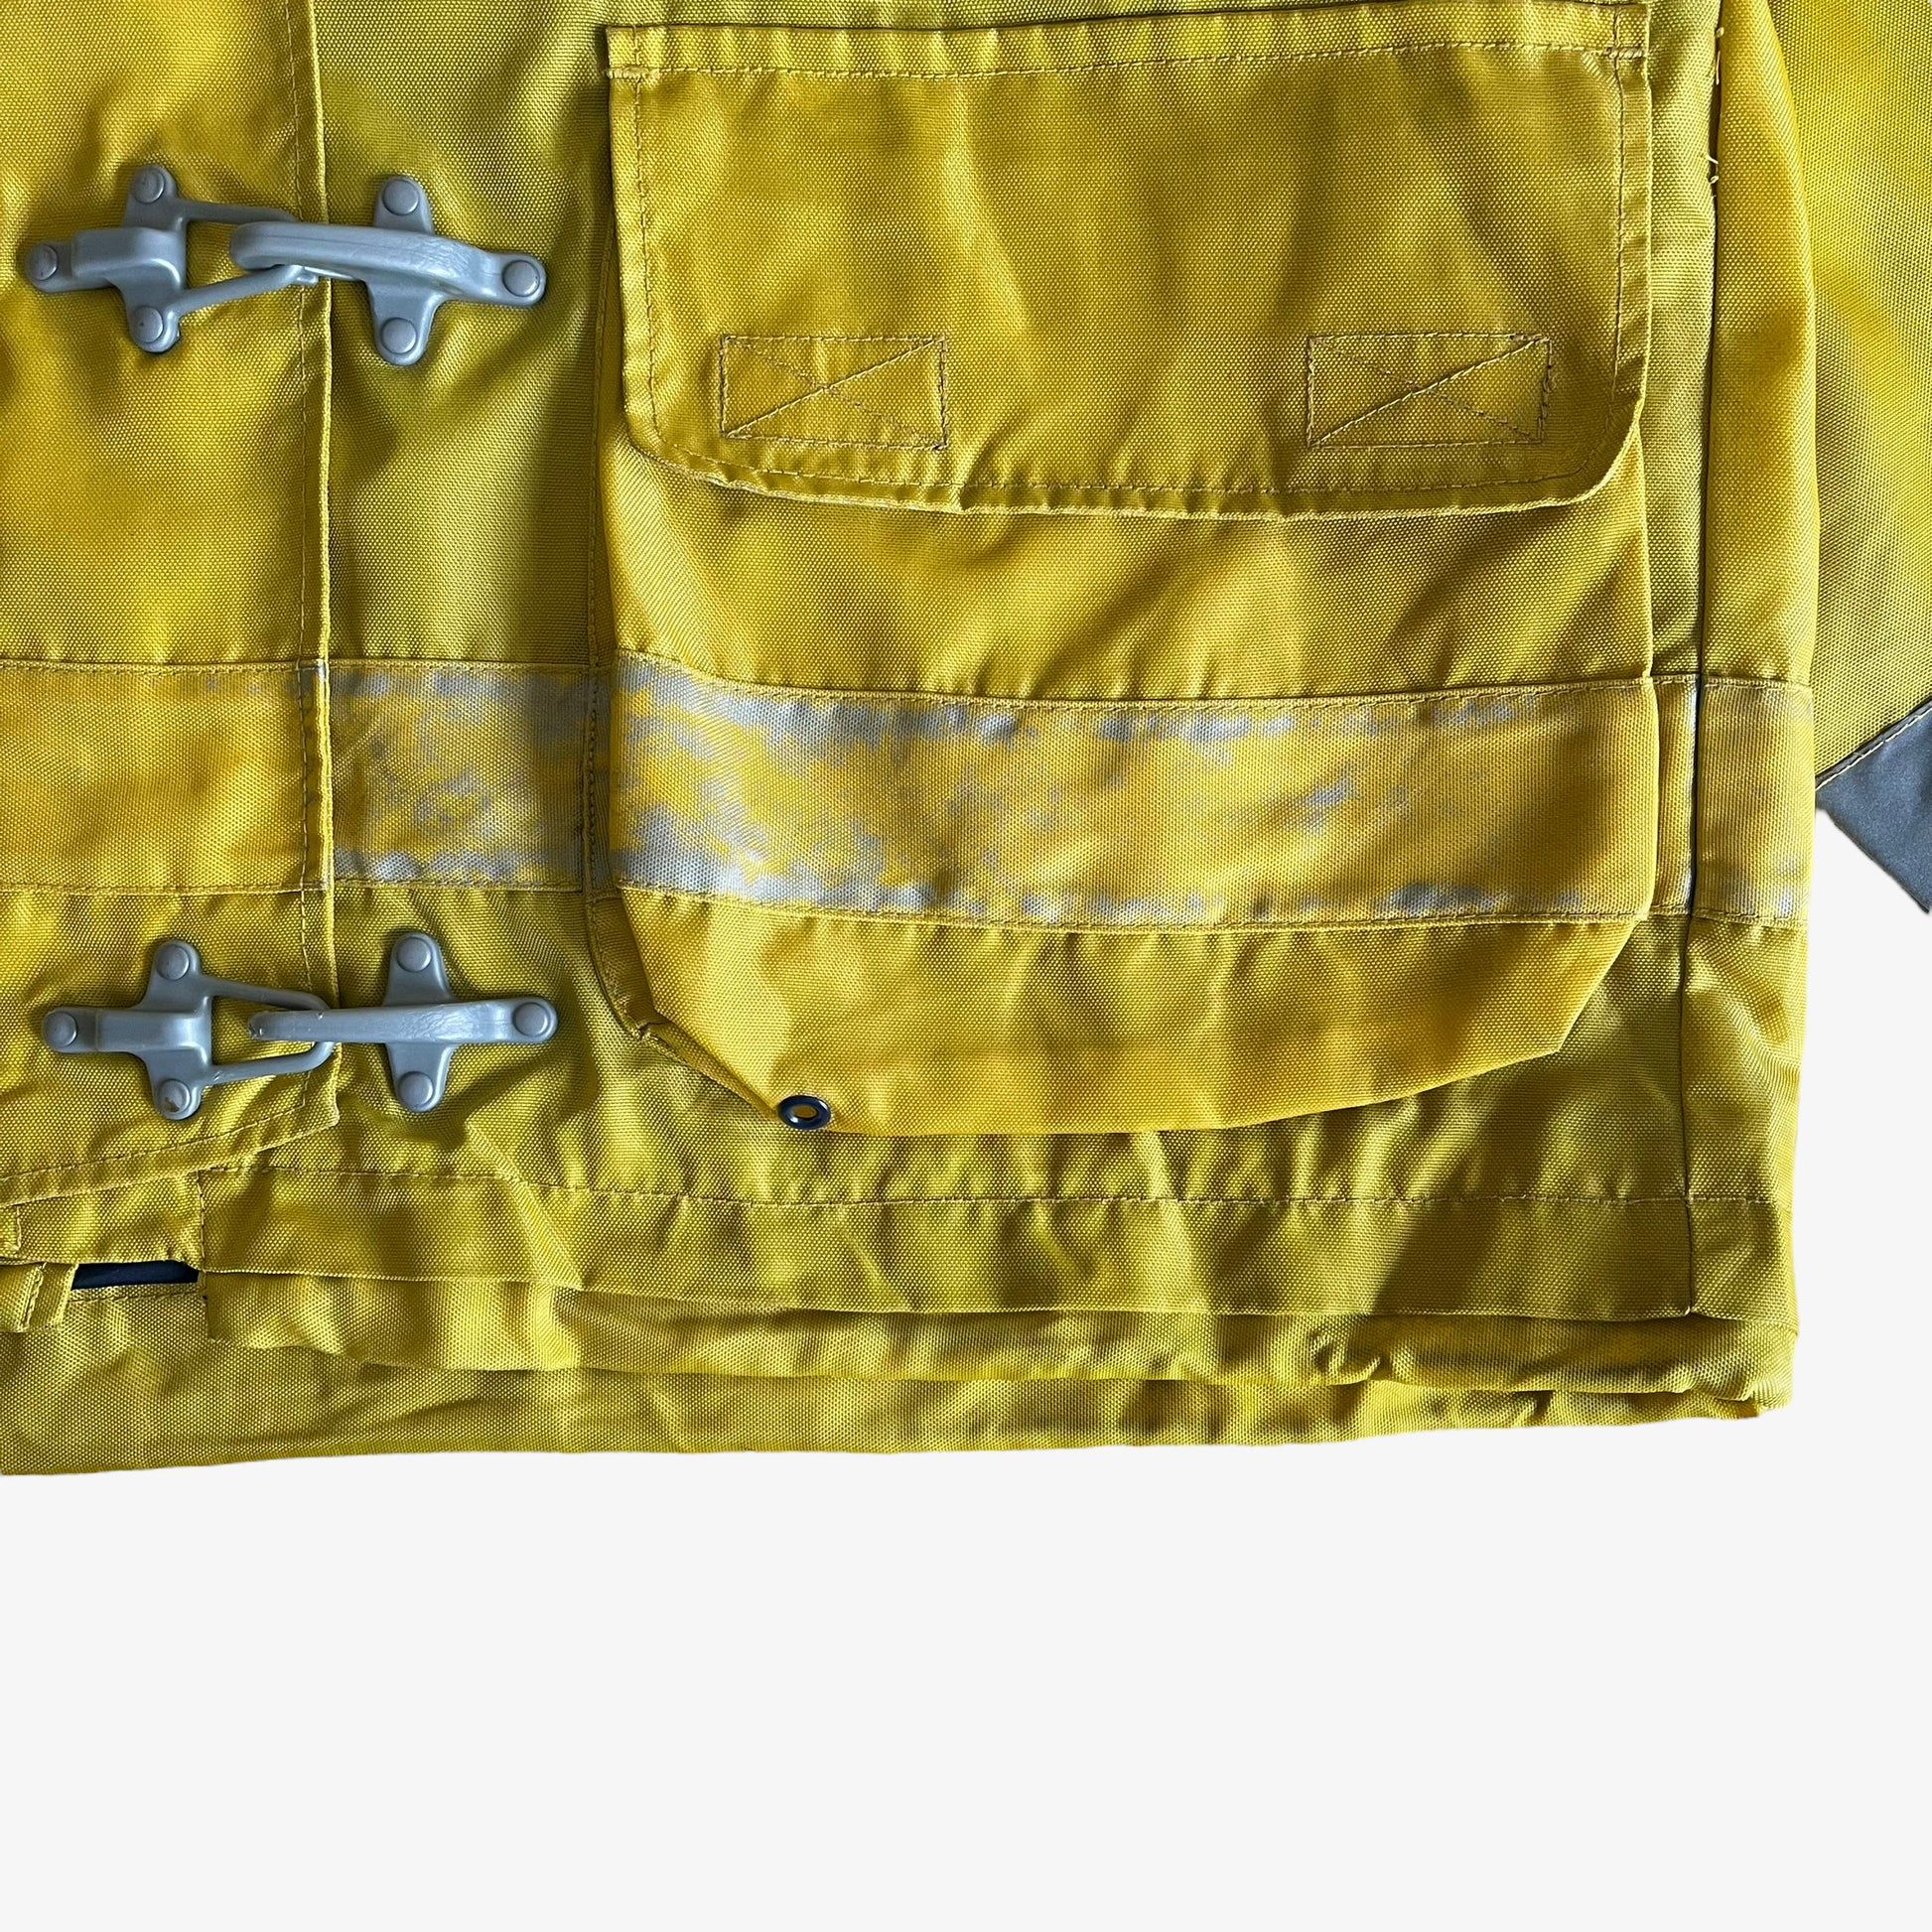 Vintage 90s Tommy Hilfiger Yellow Sailing Gear Jacket With Hook Fasteners Pocket Wear - Casspios Dream